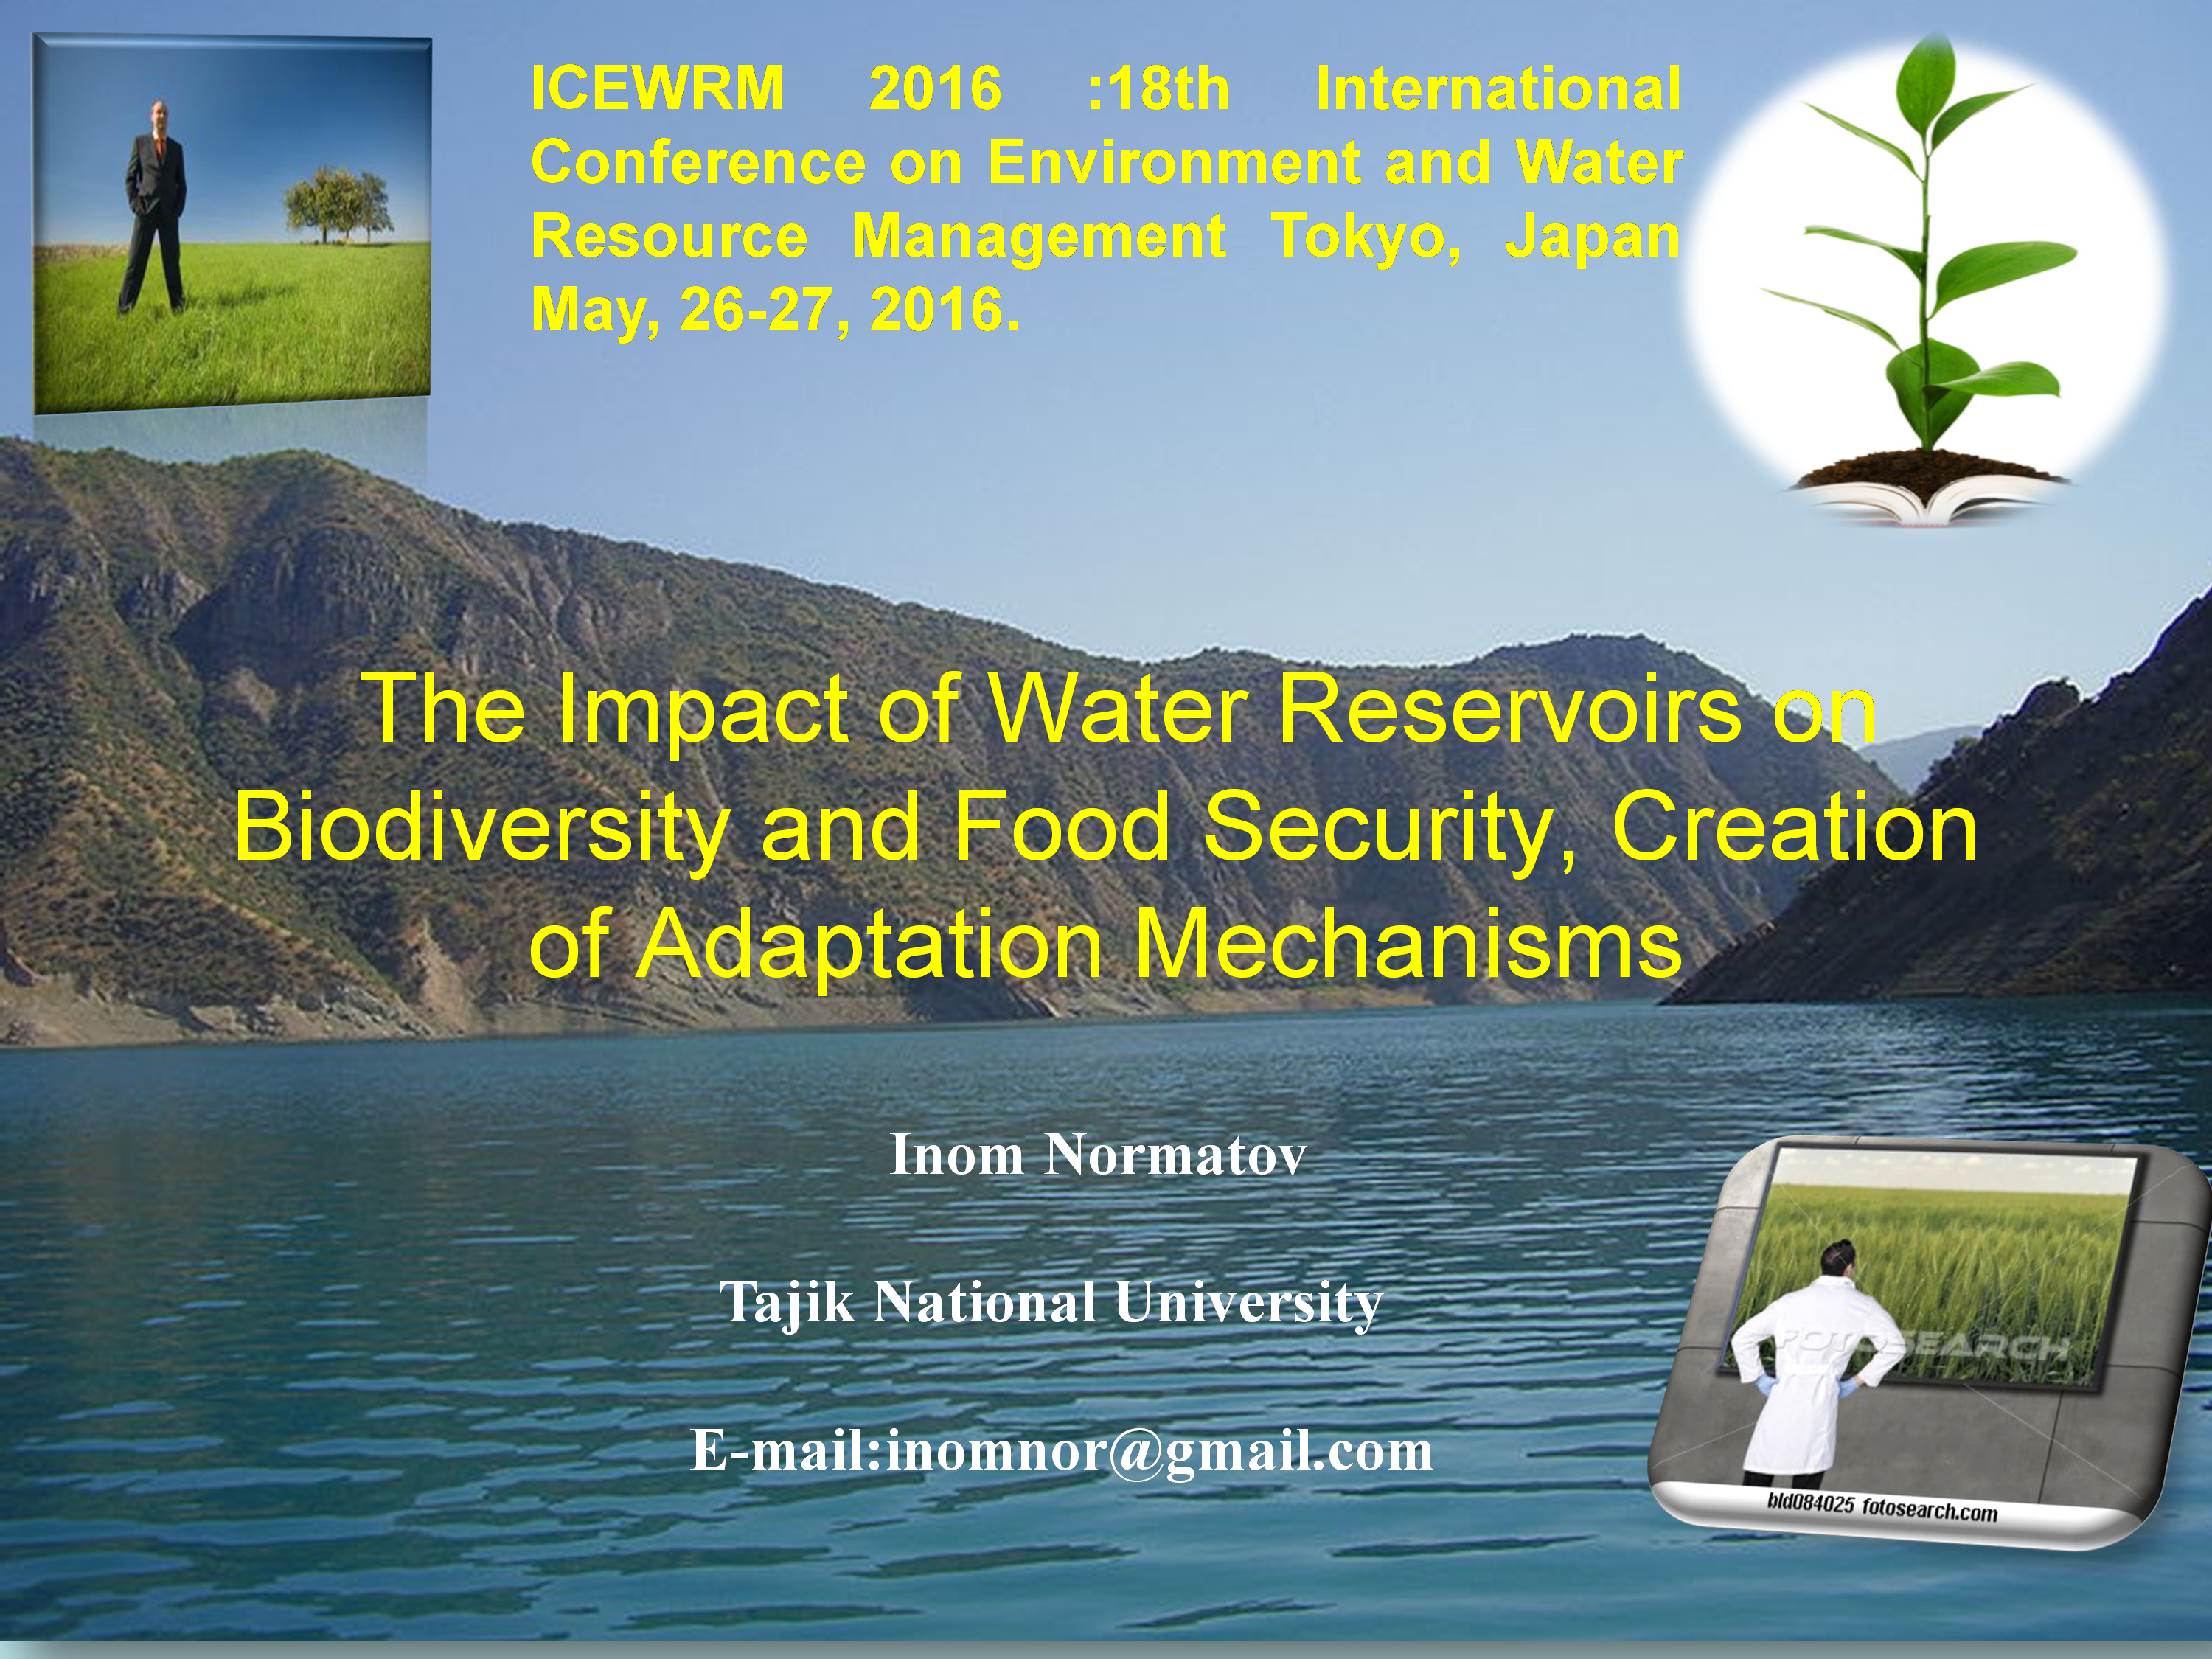 Tajik researcher discussed the issue on biodiversity and food security at the ICEWRM conference in Tokyo